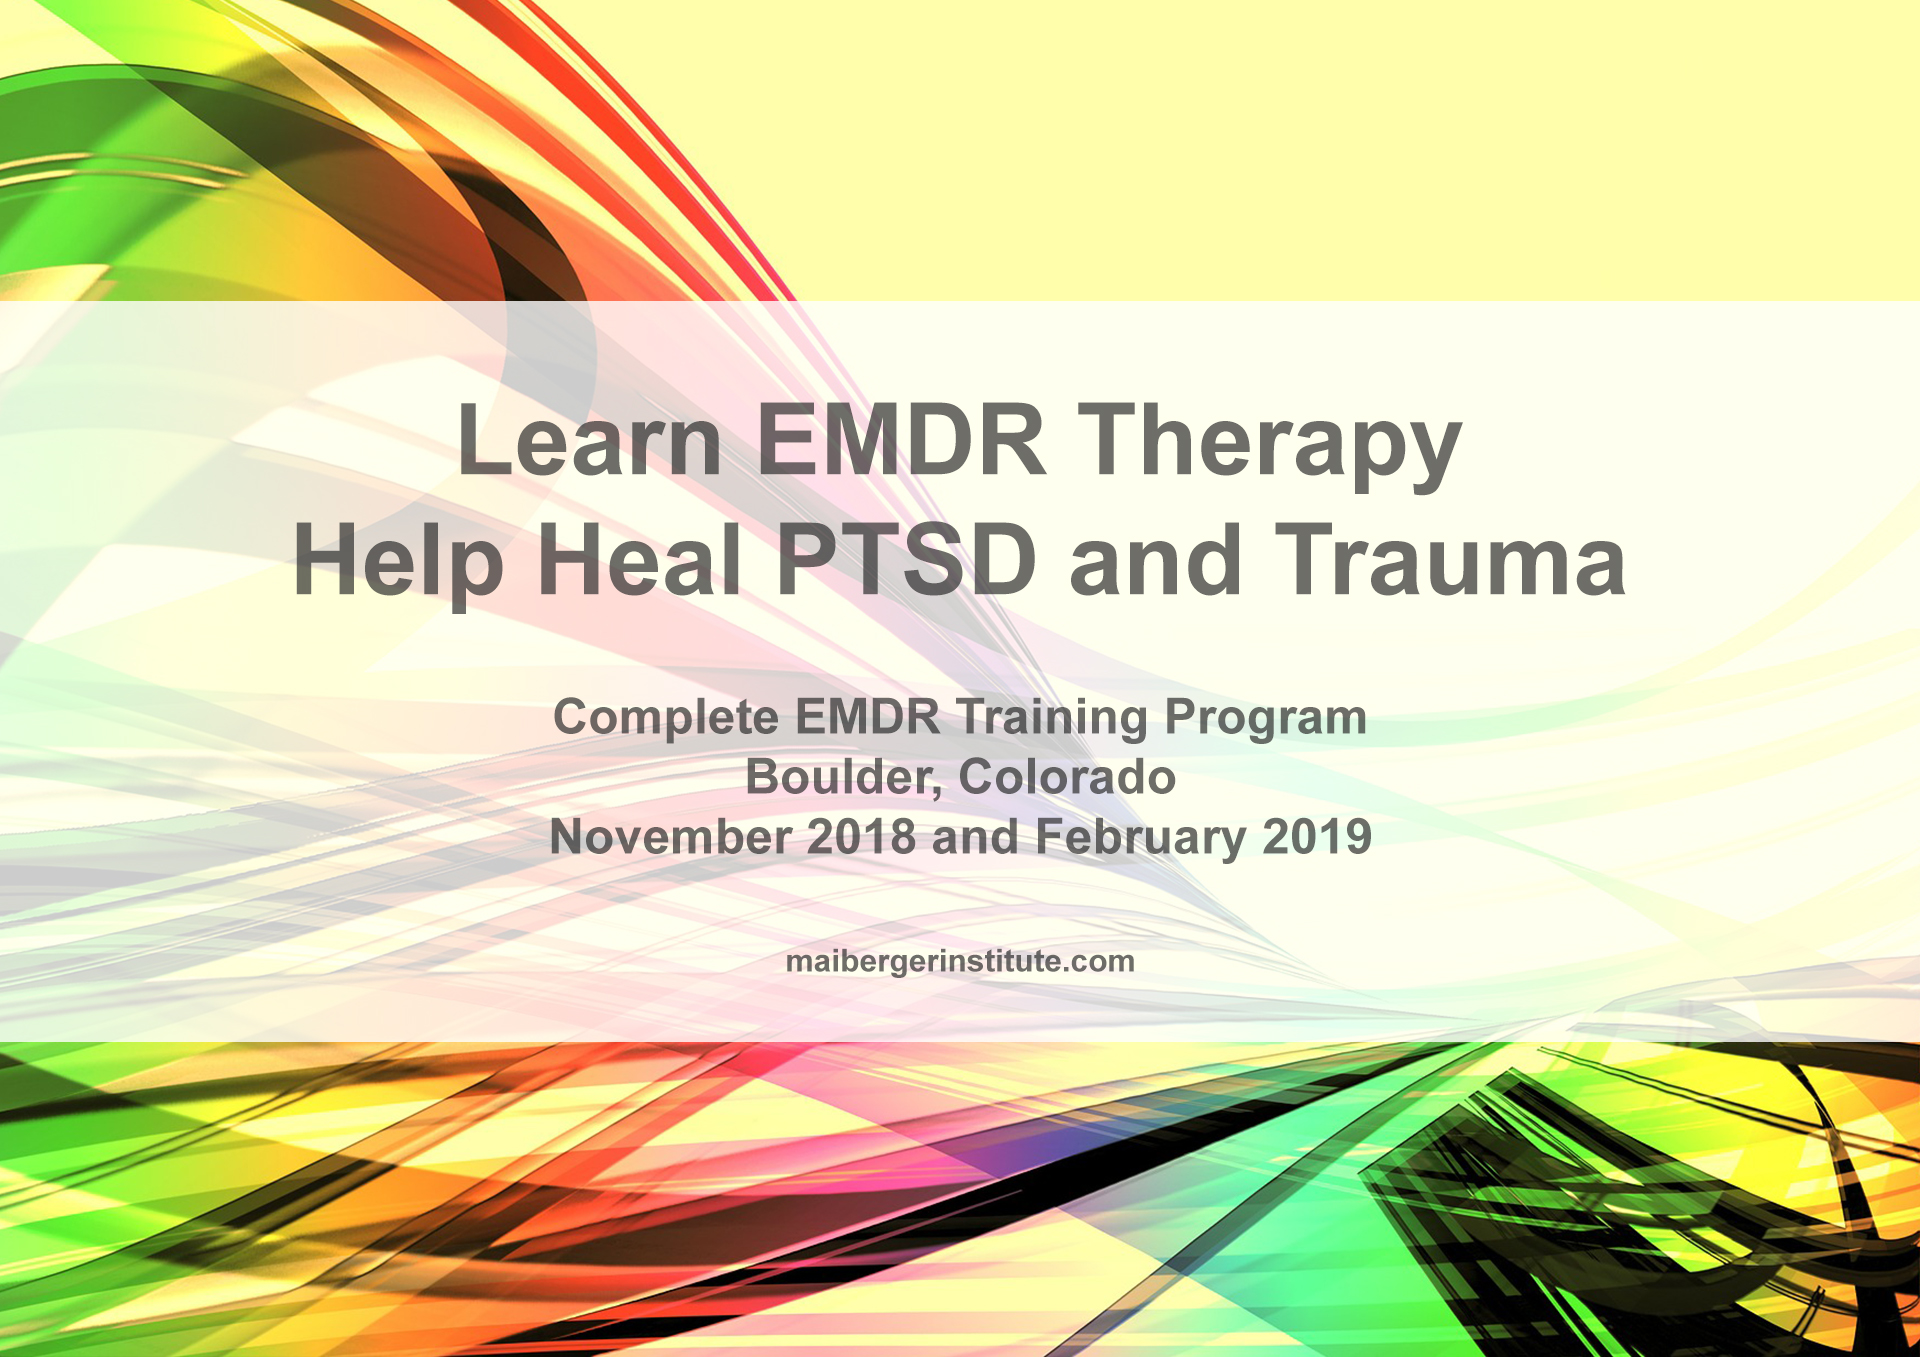 EMDR Training in Boulder, Colorado - November 2018 and February 2019 - Learn EMDR Therapy